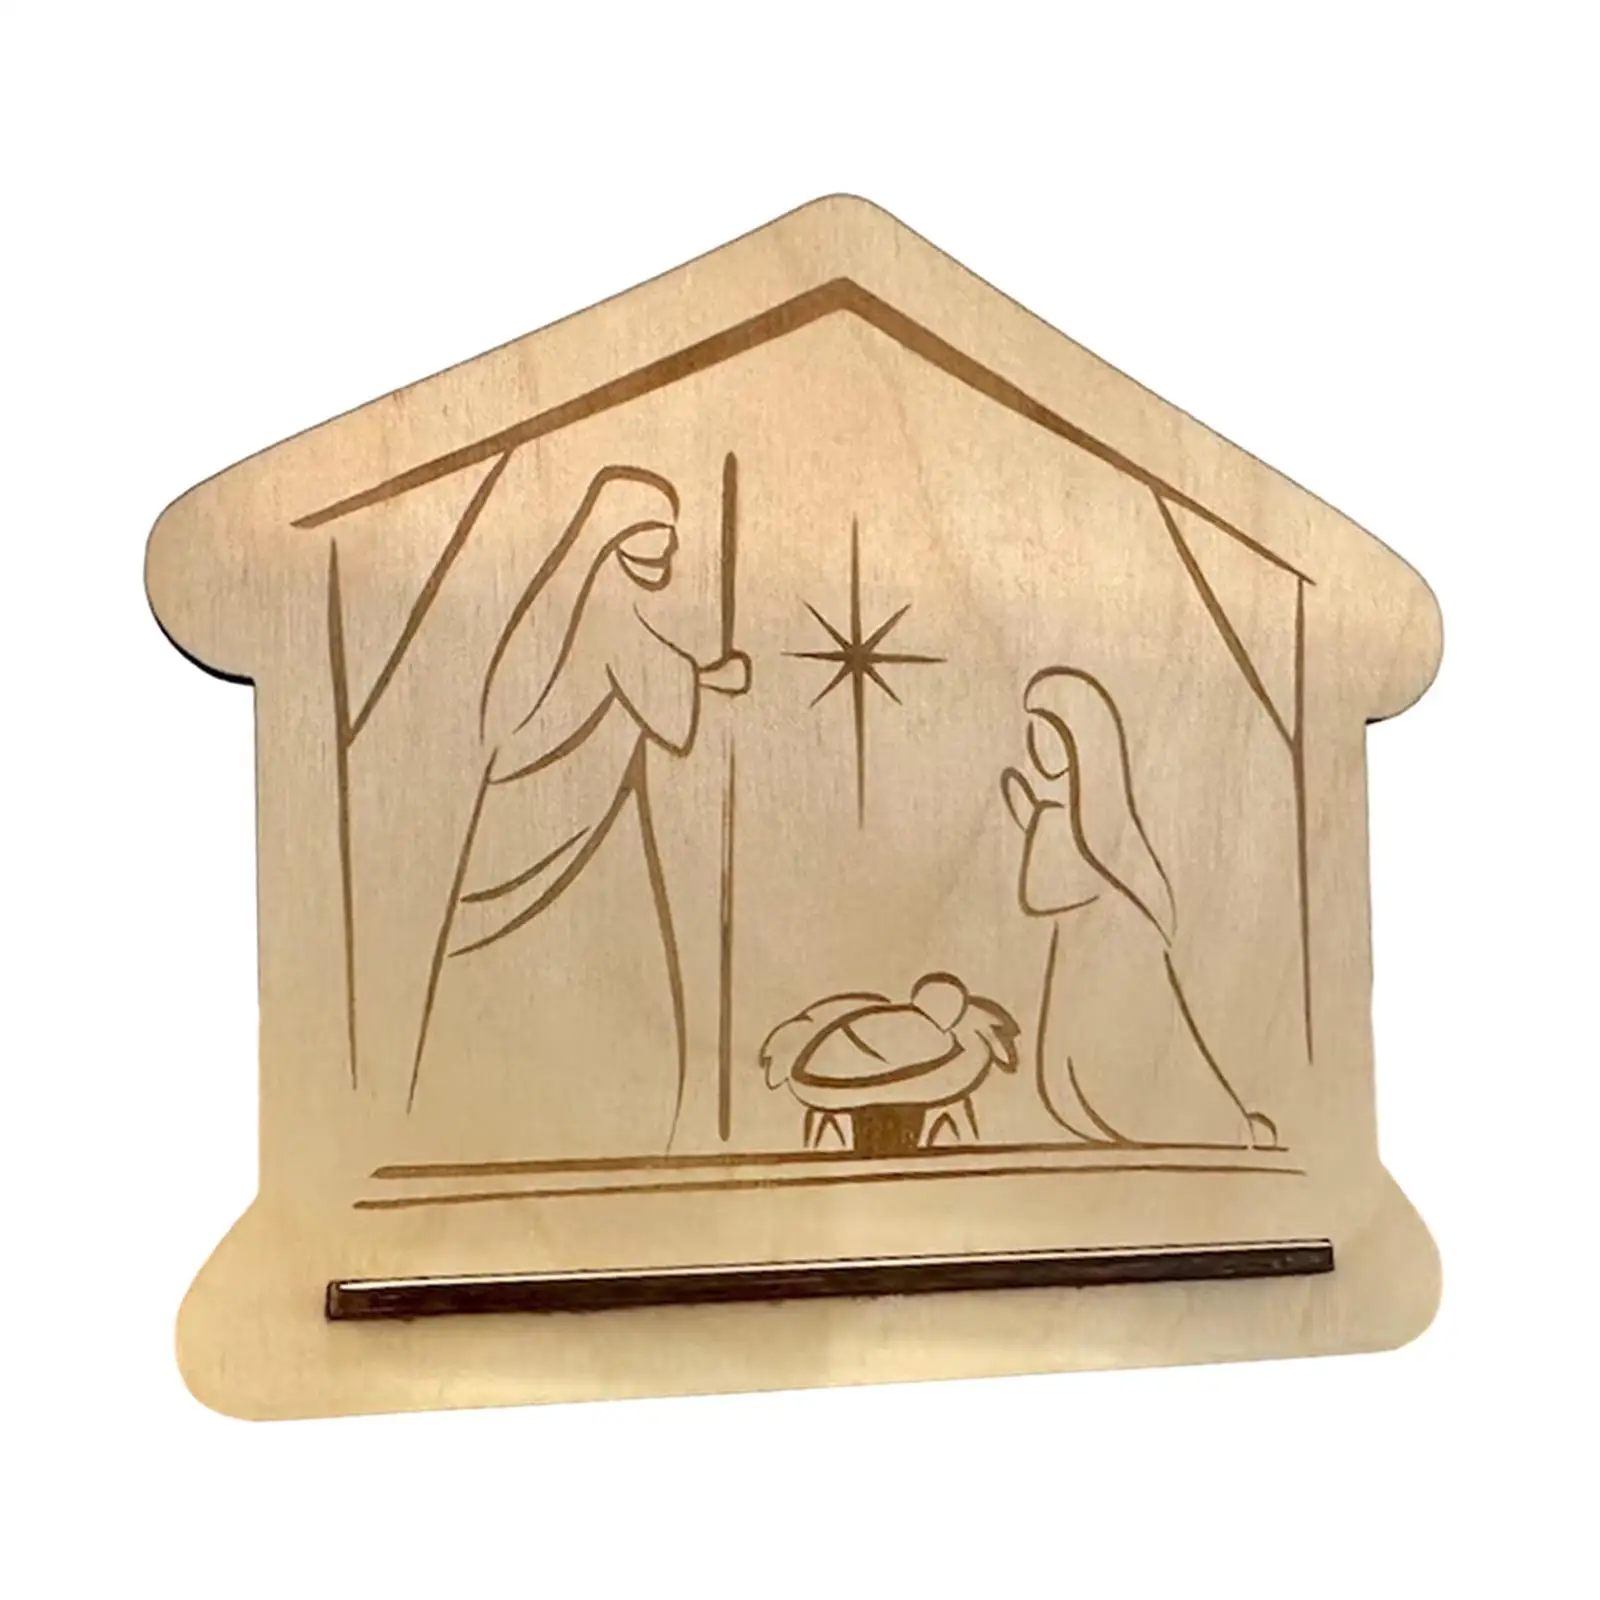 The Birth of Jesus Decorations Wood Religious Gift Xmas Decor Christmas Decorations for Table Centerpiece Home Indoor Fireplace